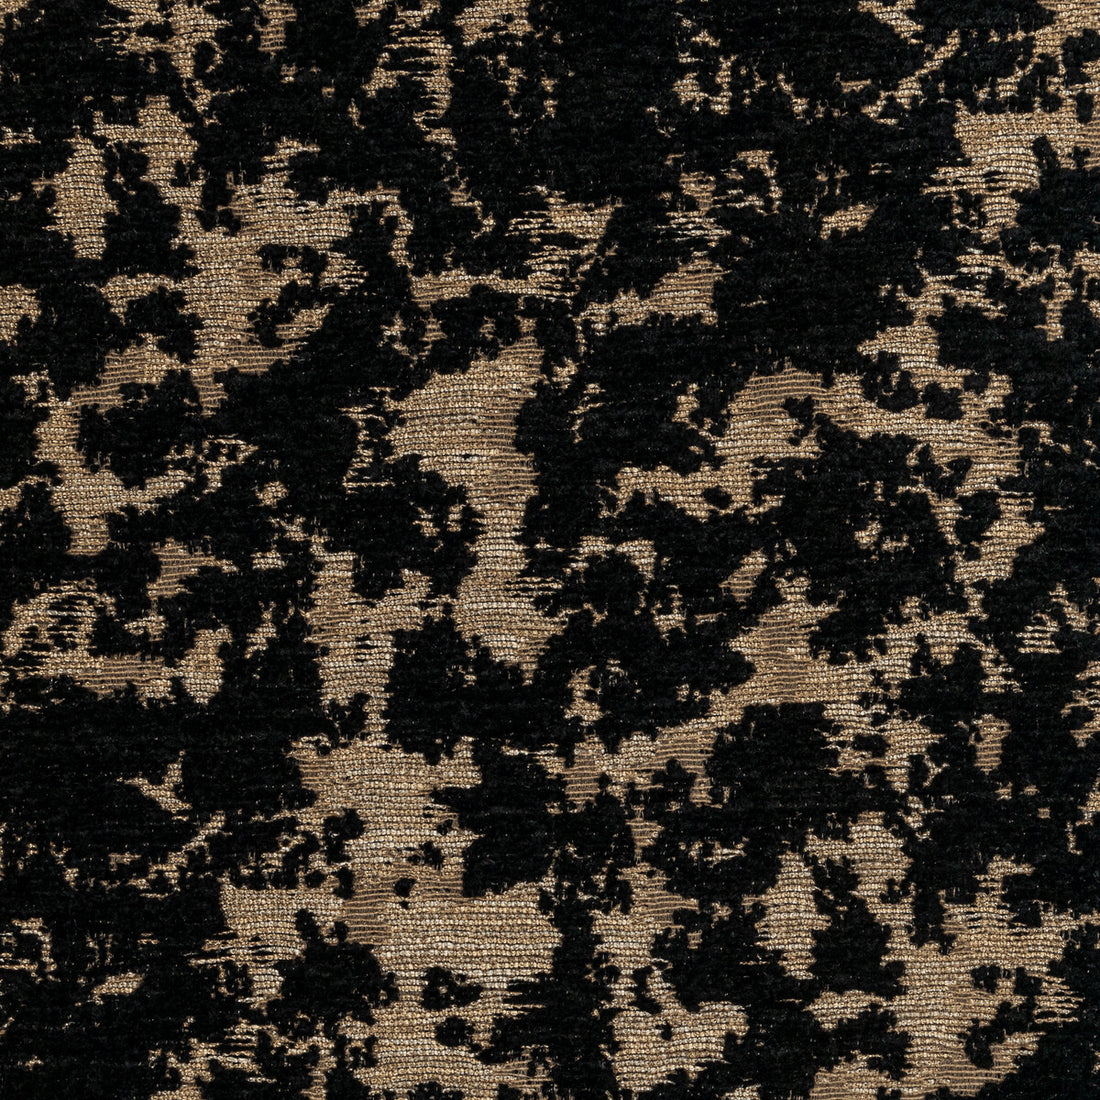 Illumine fabric in gold noir color - pattern 36355.84.0 - by Kravet Couture in the Modern Luxe III collection